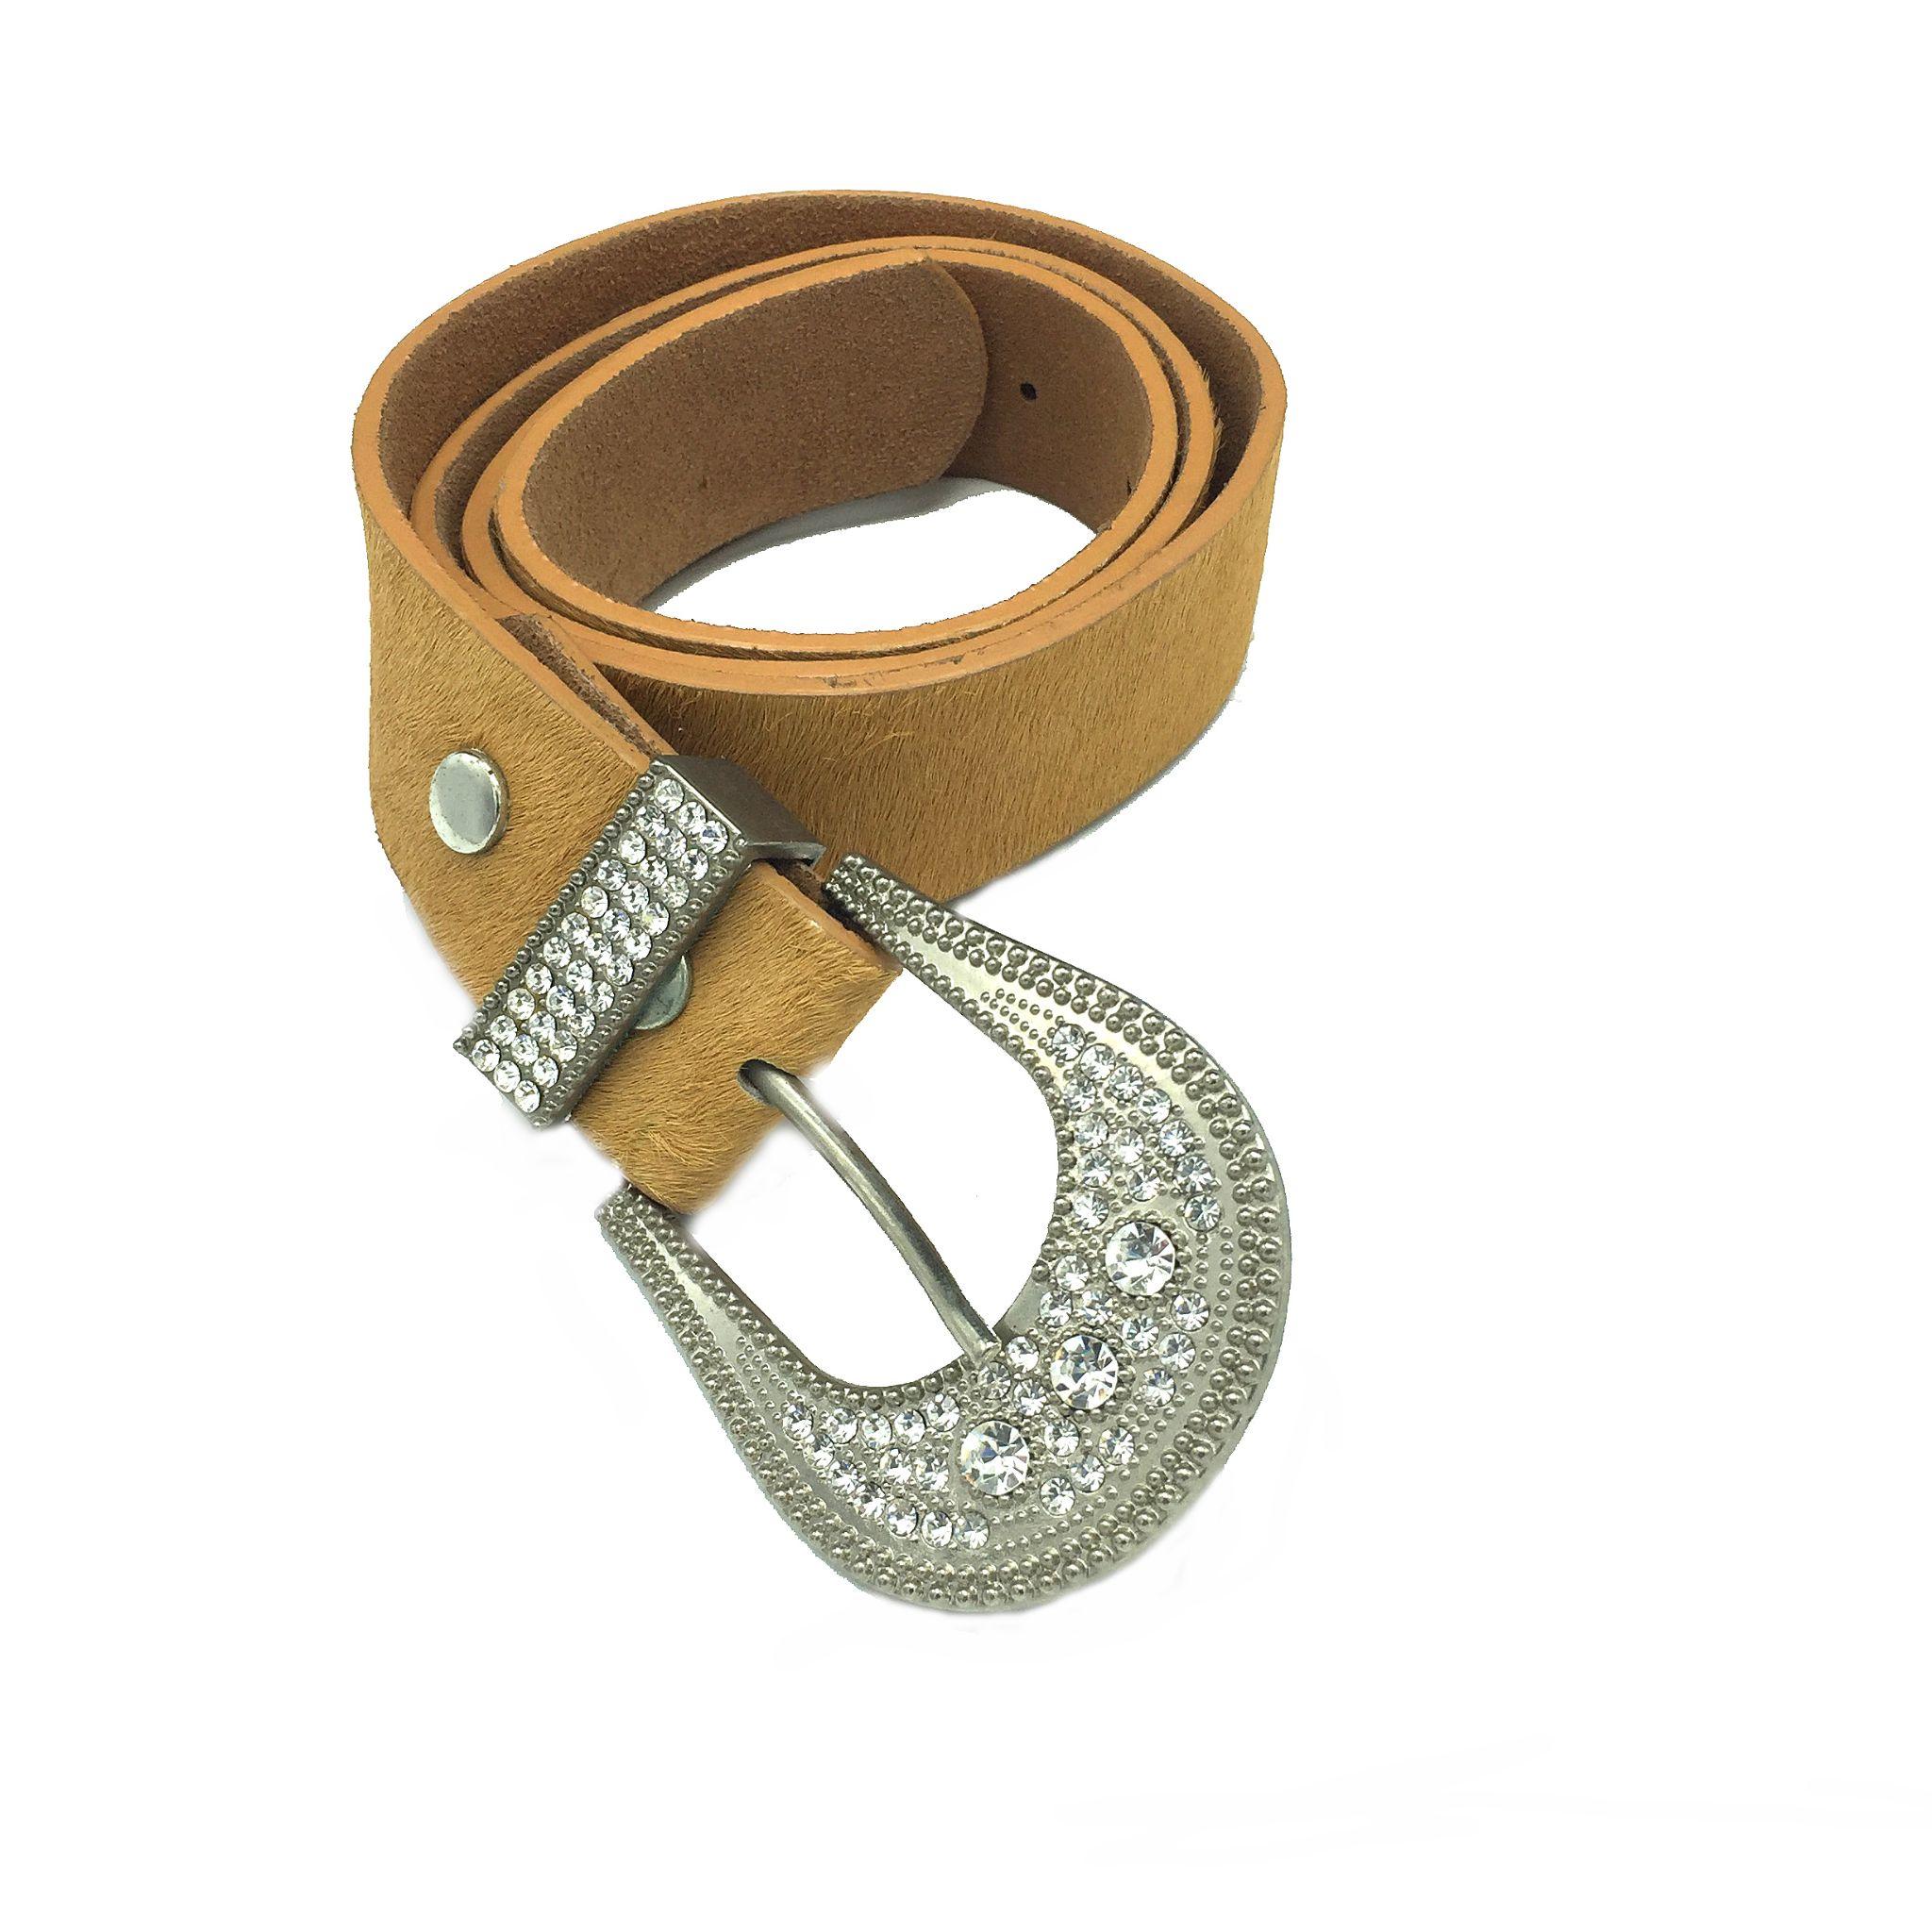 Cowhide Belt with Crystall Studded Buckle